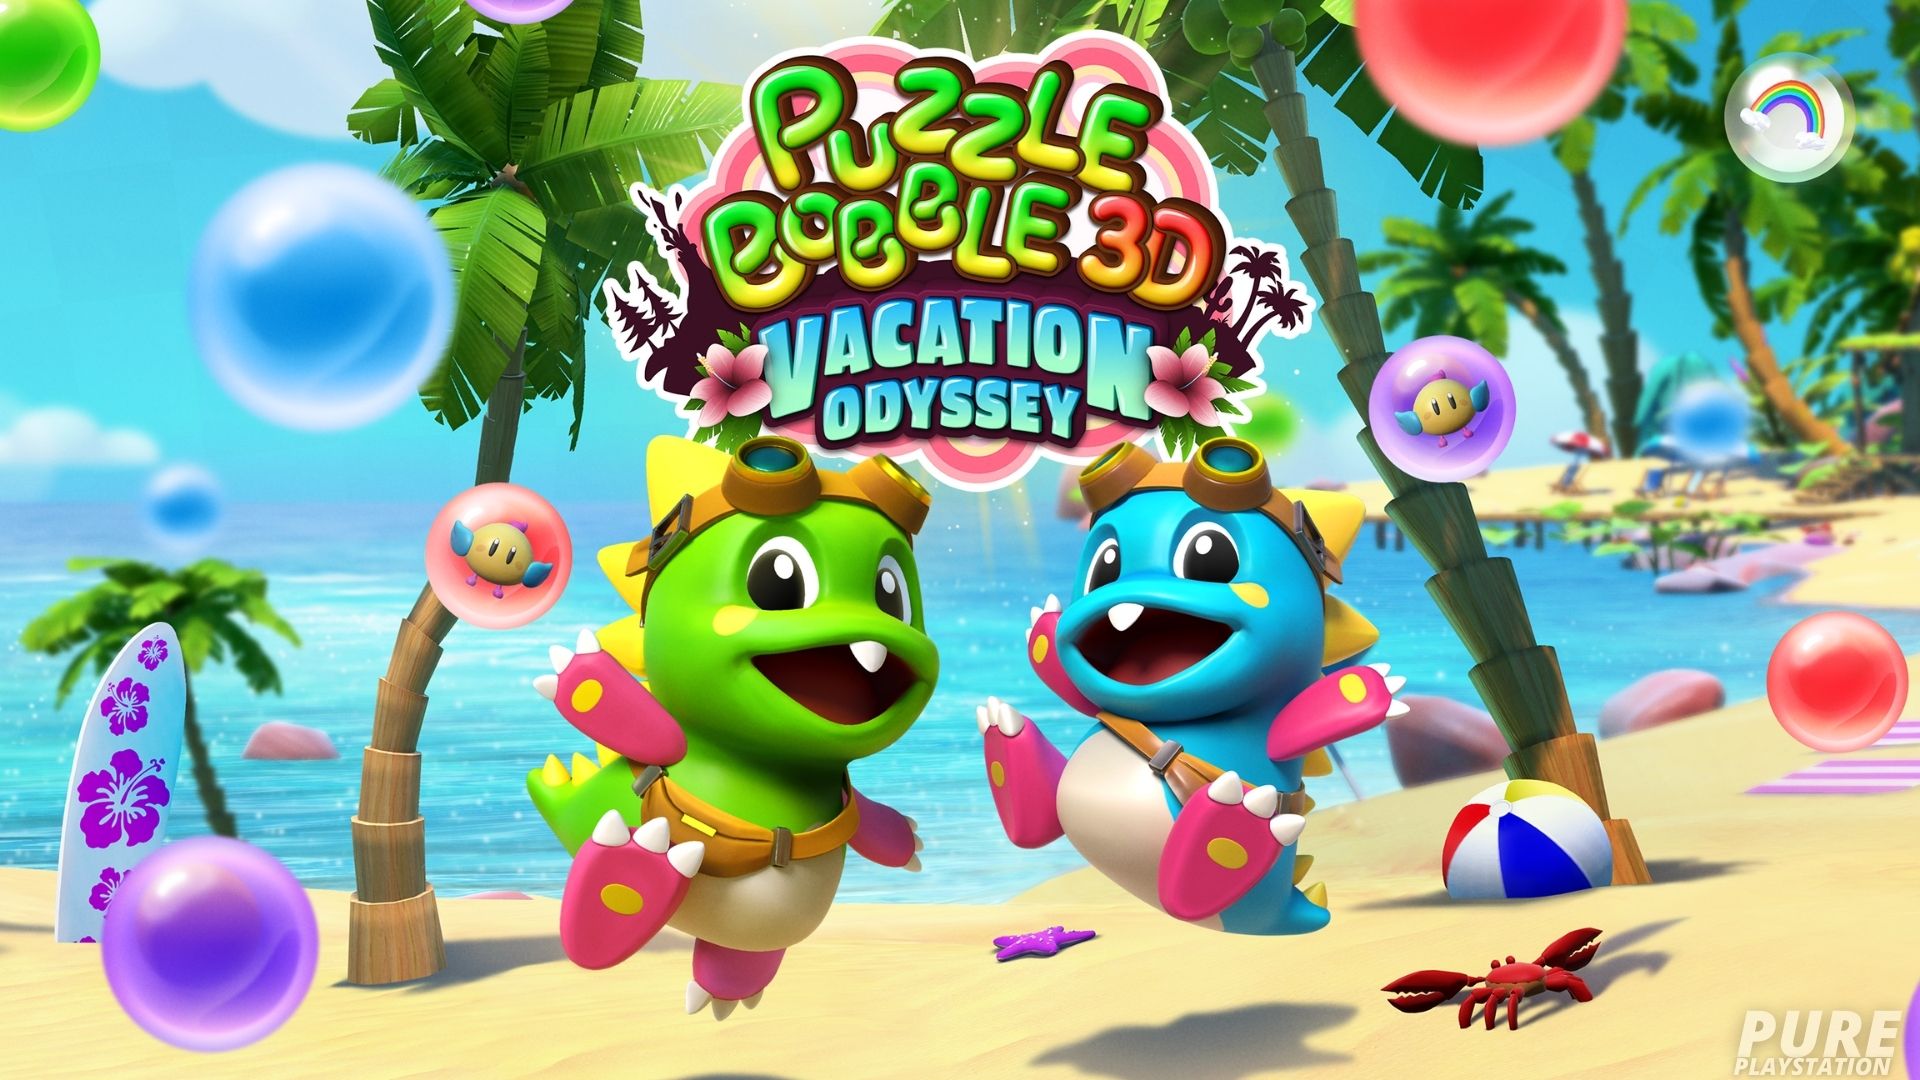 Puzzle Bobble 3D: Vacation Odyssey Gets First Gameplay Trailer and PS4/PS5 Cross-Buy Confirmation